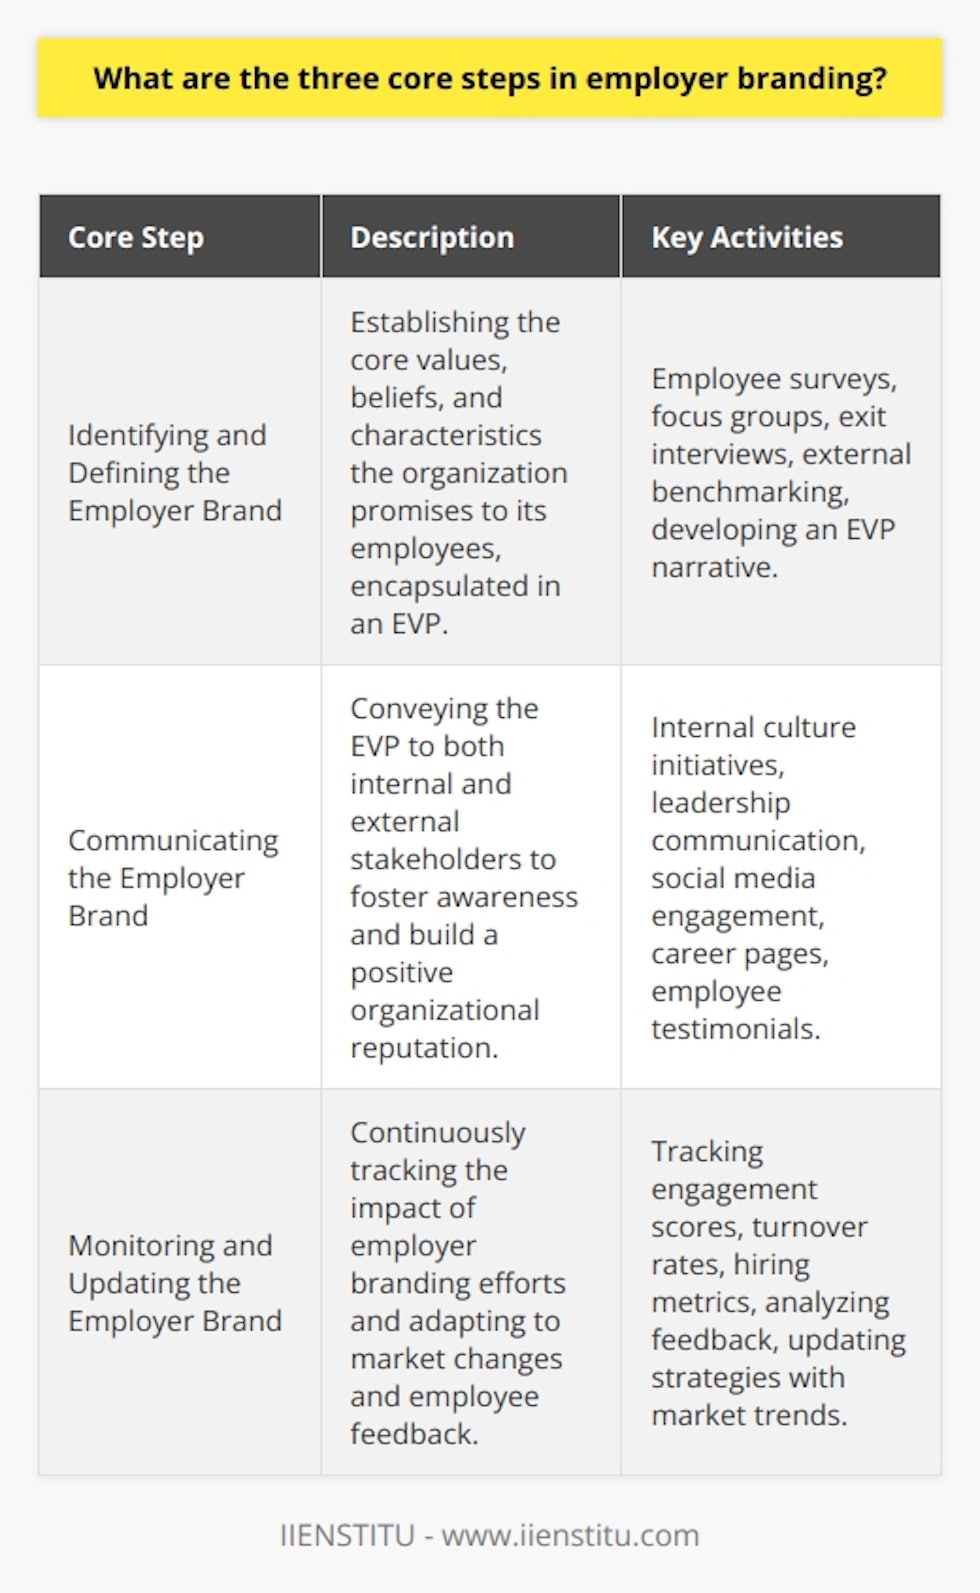 Employer branding has emerged as a critical aspect of talent management and organizational success, as it plays a significant role in attracting and retaining top talent. Proper execution of employer branding strategies involves a series of deliberate steps, and below are the three core steps that organizations should undertake to cultivate a strong employer brand.Identifying and Defining the Employer BrandThe journey to a compelling employer brand commences with identifying and defining what the organization stands for as an employer. This step is intrinsic to developing a unique Employer Value Proposition (EVP), which is at the heart of employer branding. The EVP encompasses the core values, beliefs, and attributes that the organization promises to its employees. To formulate an authentic EVP, it is imperative to engage with current employees to understand what they value most about working for the company, identify organizational strengths and any areas that might require improvement.Internal assessments such as employee surveys, focus groups, and exit interviews alongside external benchmarking against industry standards can provide indispensable insights. This process yields distinct themes and elements that resonate with the existing work culture and aspirational targets of the desired work environment. Crafting a narrative that integrates these aspects will result in an EVP that not merely attracts potential recruits but also resonates with current employees, encouraging long-term commitment.Communicating the Employer BrandOnce the EVP is well-articulated, the subsequent step is to communicate it through various channels to create awareness and build a positive perception of the organization as a great place to work. This step is twofold—internal communication to existing employees and external communication to potential candidates and the public.Internally, it is about creating and nurturing an environment that lives up to the EVP. It entails onboarding programs, employee development initiatives, leadership communication, and company events that reinforce the organization's commitment to its values and promises.Externally, the deployment of a multitude of platforms is necessary to reach a broad audience effectively. A compelling career page, engaging social media content, narrative-rich job postings, and the leveraged voice of the employees through testimonials and storytelling are all instrumental. Organizations should strive to ensure that the messaging is consistent, authentic, and transparent, which helps in building a reputable brand perception that aligns with the EVP's promises.Monitoring and Updating the Employer BrandIn an ever-dynamic business world characterized by changing demographics, evolving job market trends, and shifting employee expectations, an employer's brand cannot be static. Hence, the third core step is the continual process of monitoring and updating the employer brand. Organizations must keep their fingers on the pulse of their branding efforts by establishing metrics to track performance—such as employee engagement scores, turnover rates, hiring successes, and employer ratings on job search platforms.This data-driven approach allows organizations to assess the efficacy of their employer brand strategy and identify areas for refinement. Feedback mechanisms should be in place to gather continuous input from employees. Additionally, staying abreast of market trends and integrating them into the employer branding strategy ensures that the organization remains attractive to current and prospective talent.In conclusion, the three core steps in employer branding—identifying and defining the brand, communicating it effectively, and continuously monitoring and updating—are essential for organizations seeking to establish a resilient employer brand. When executed meticulously, these steps foster a productive and engaging workplace that not only draws top-tier candidates but also nurtures a dedicated workforce aligned with the organization's mission and values.